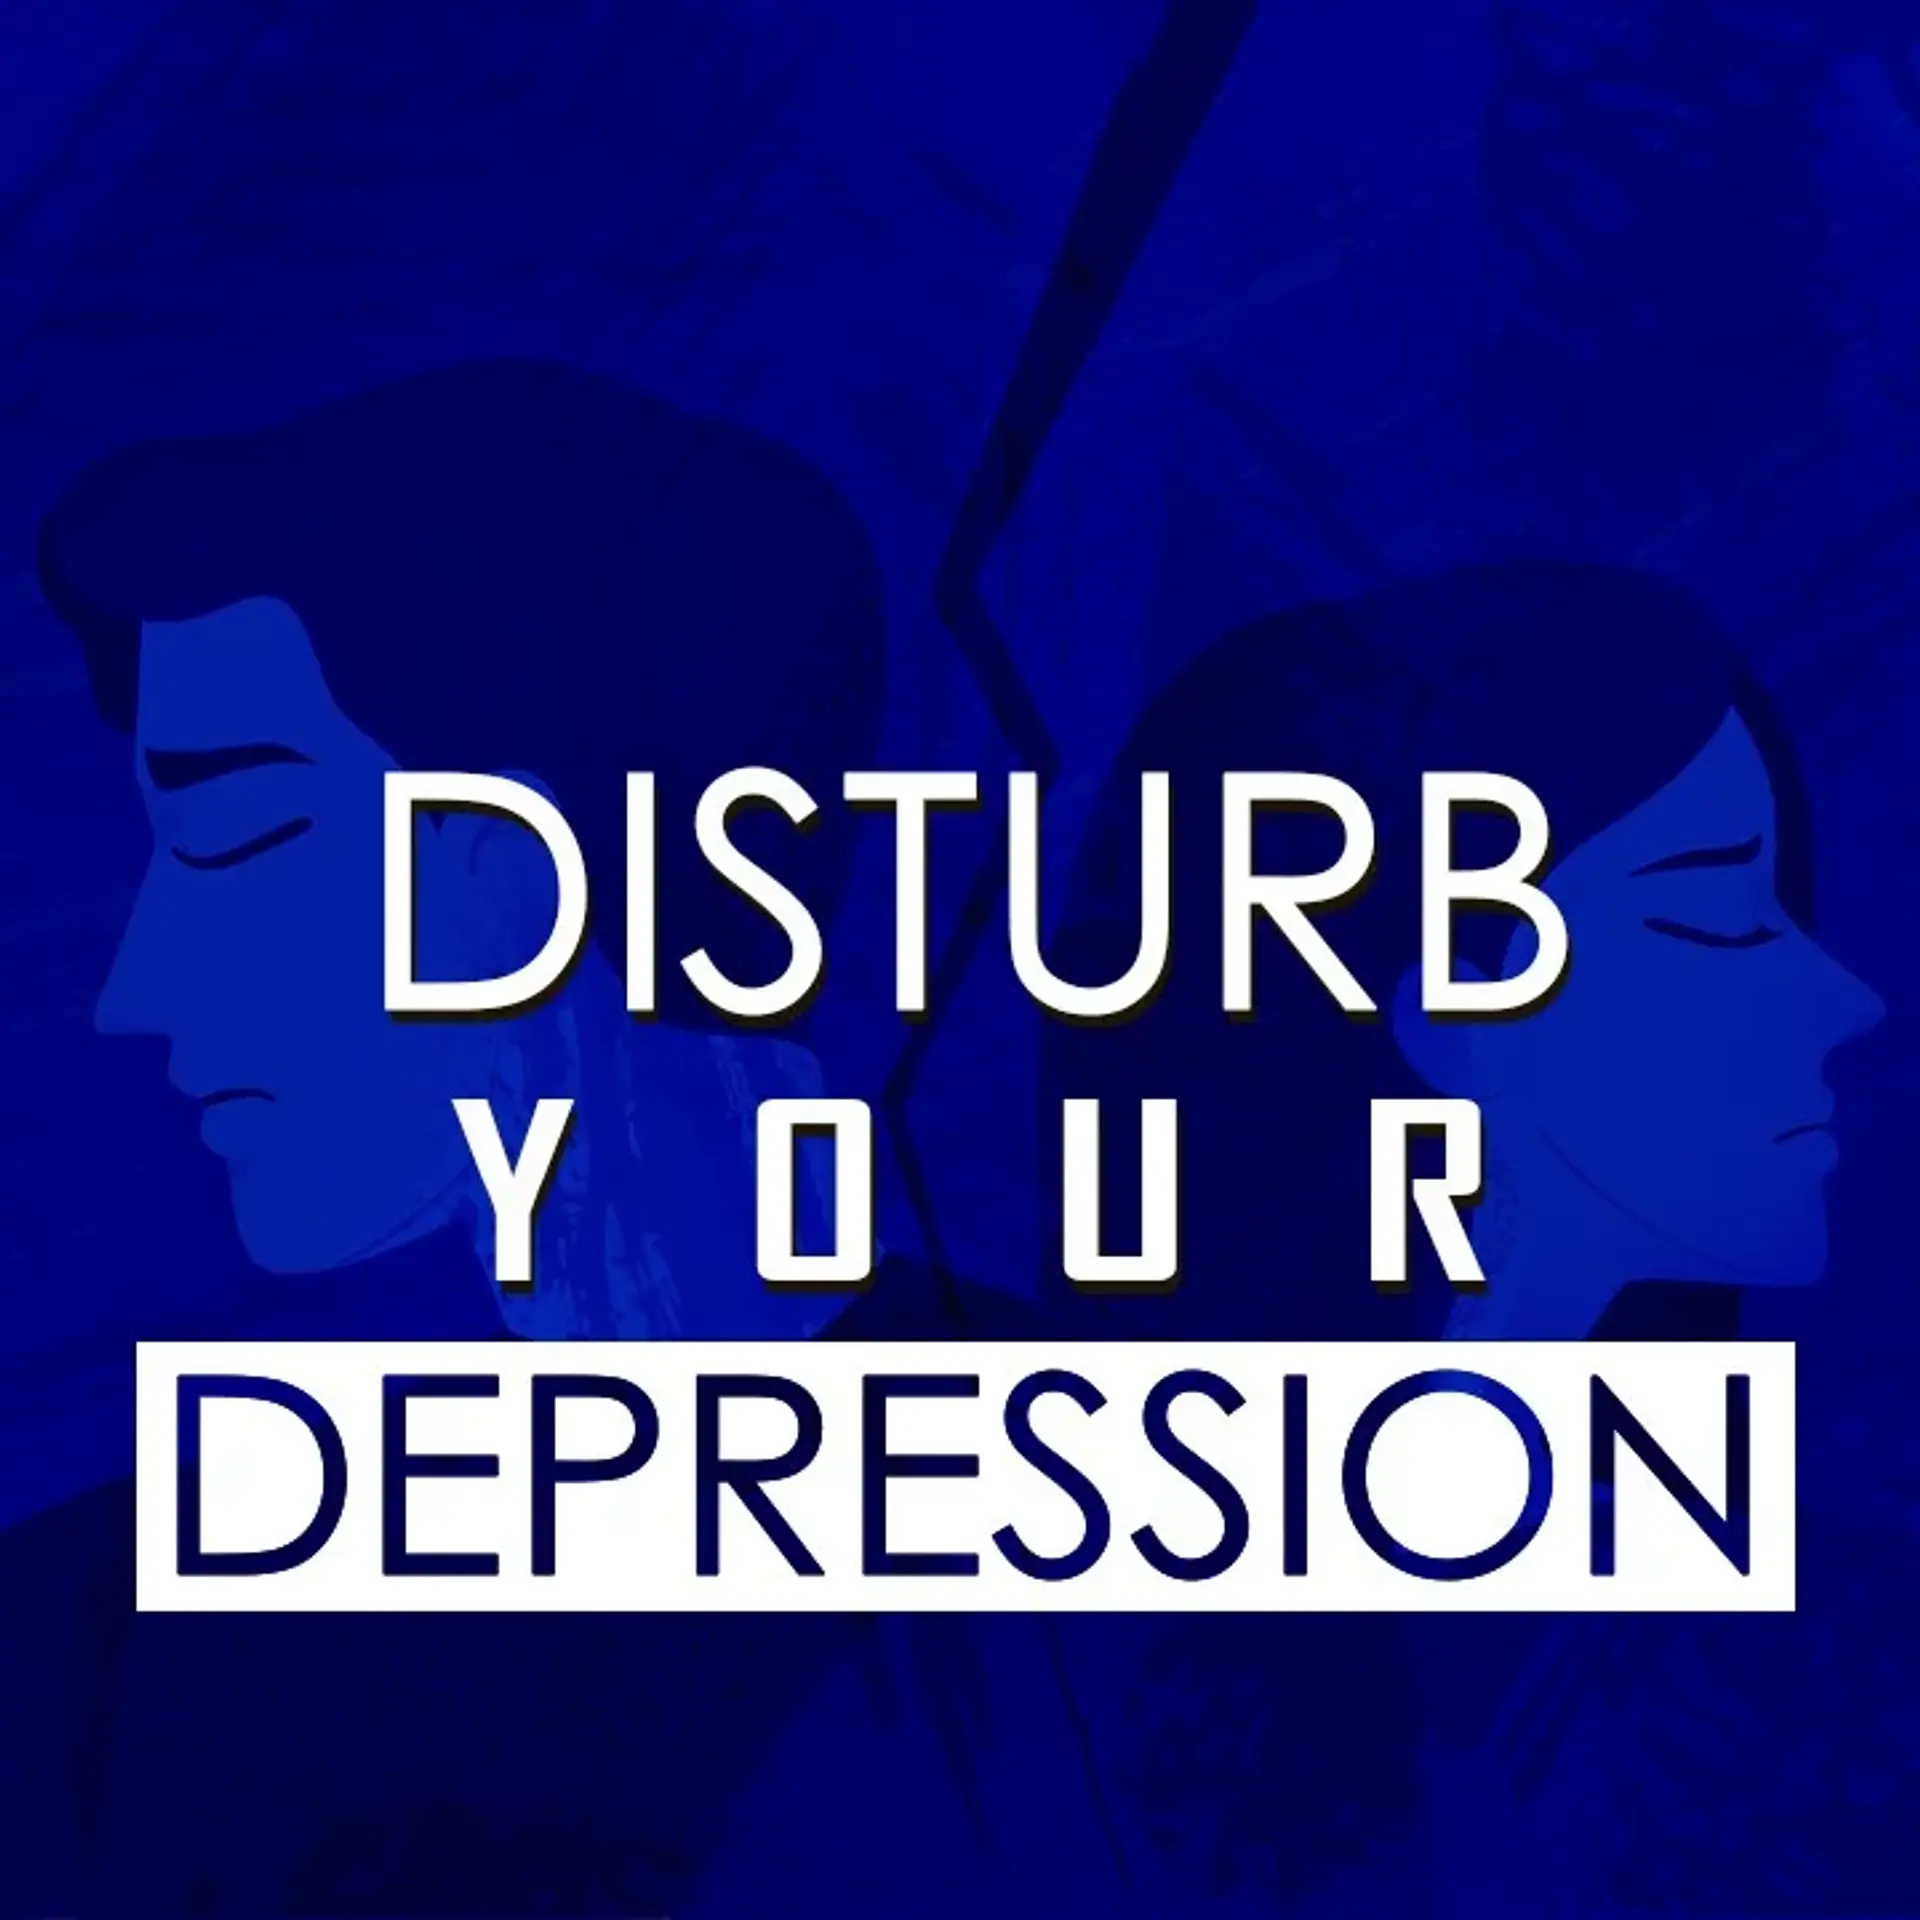 1. Depression is Your Friend | 